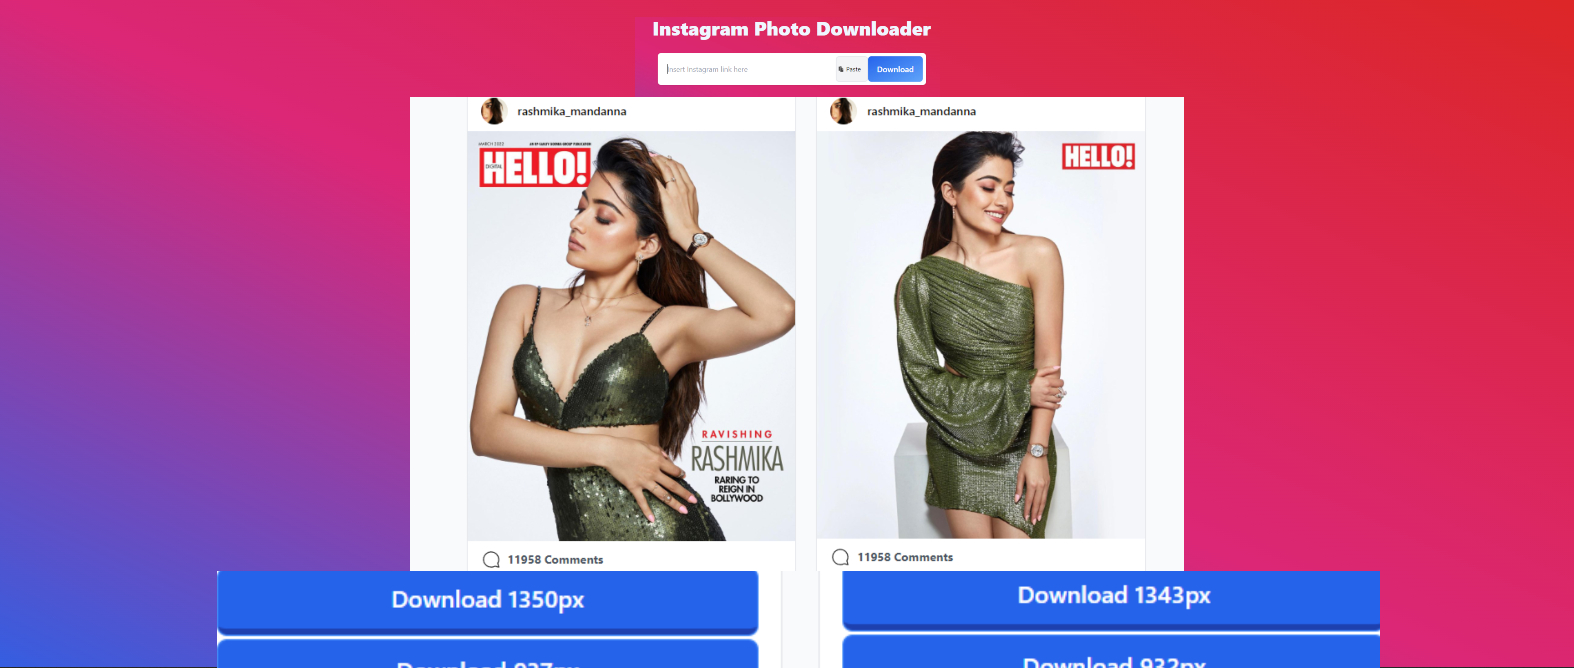 How To Download Pictures From Instagram 2022 1